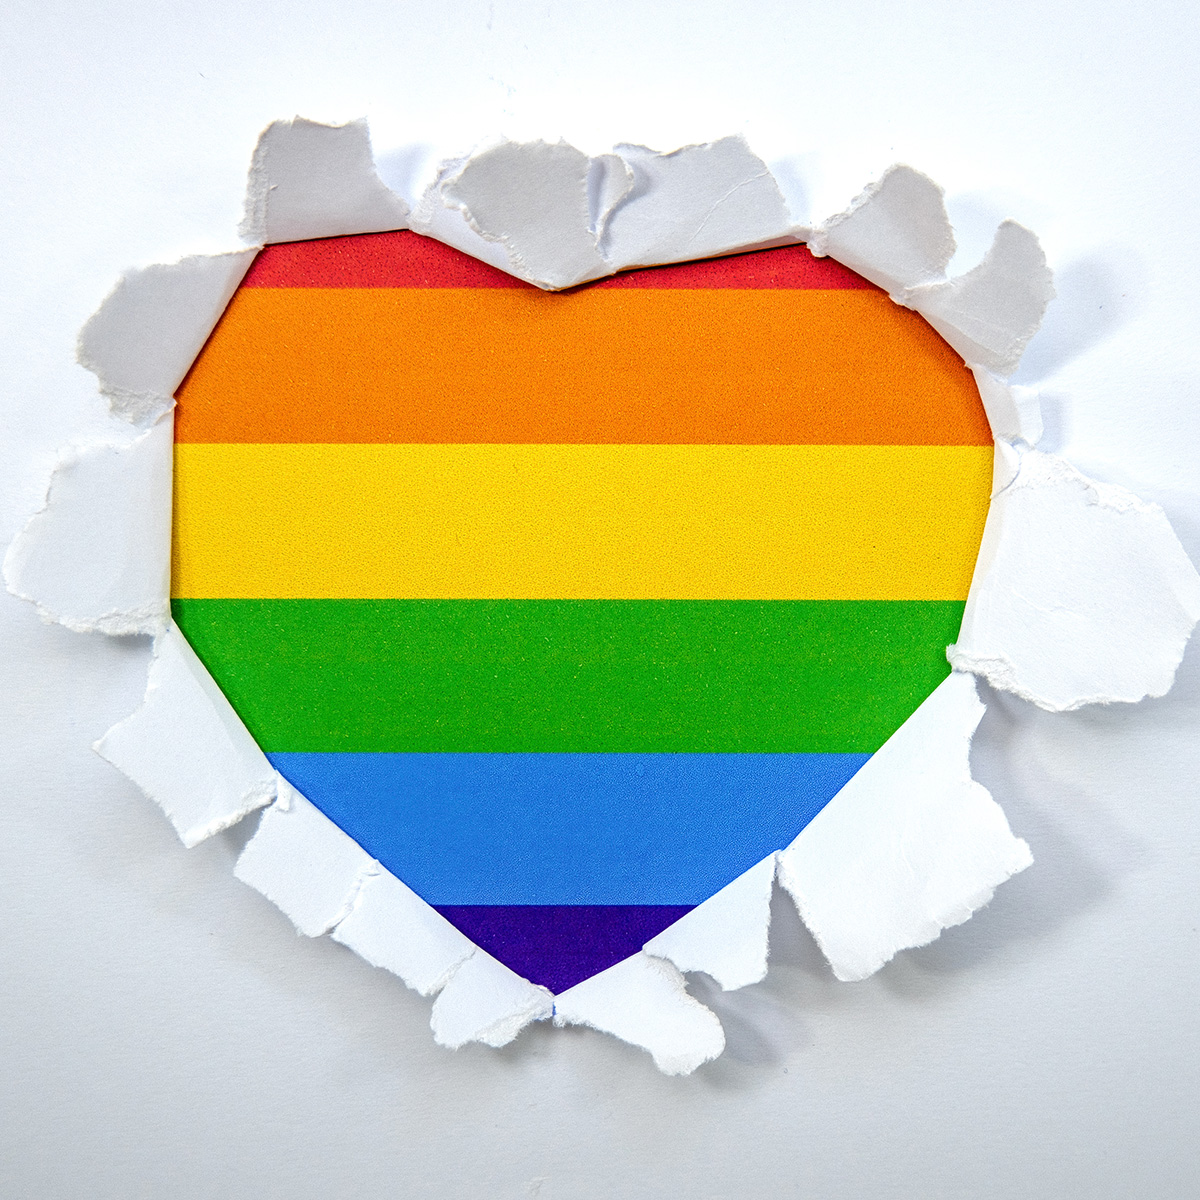 Pride colors are bursting through a blank page forming the shape of a heart